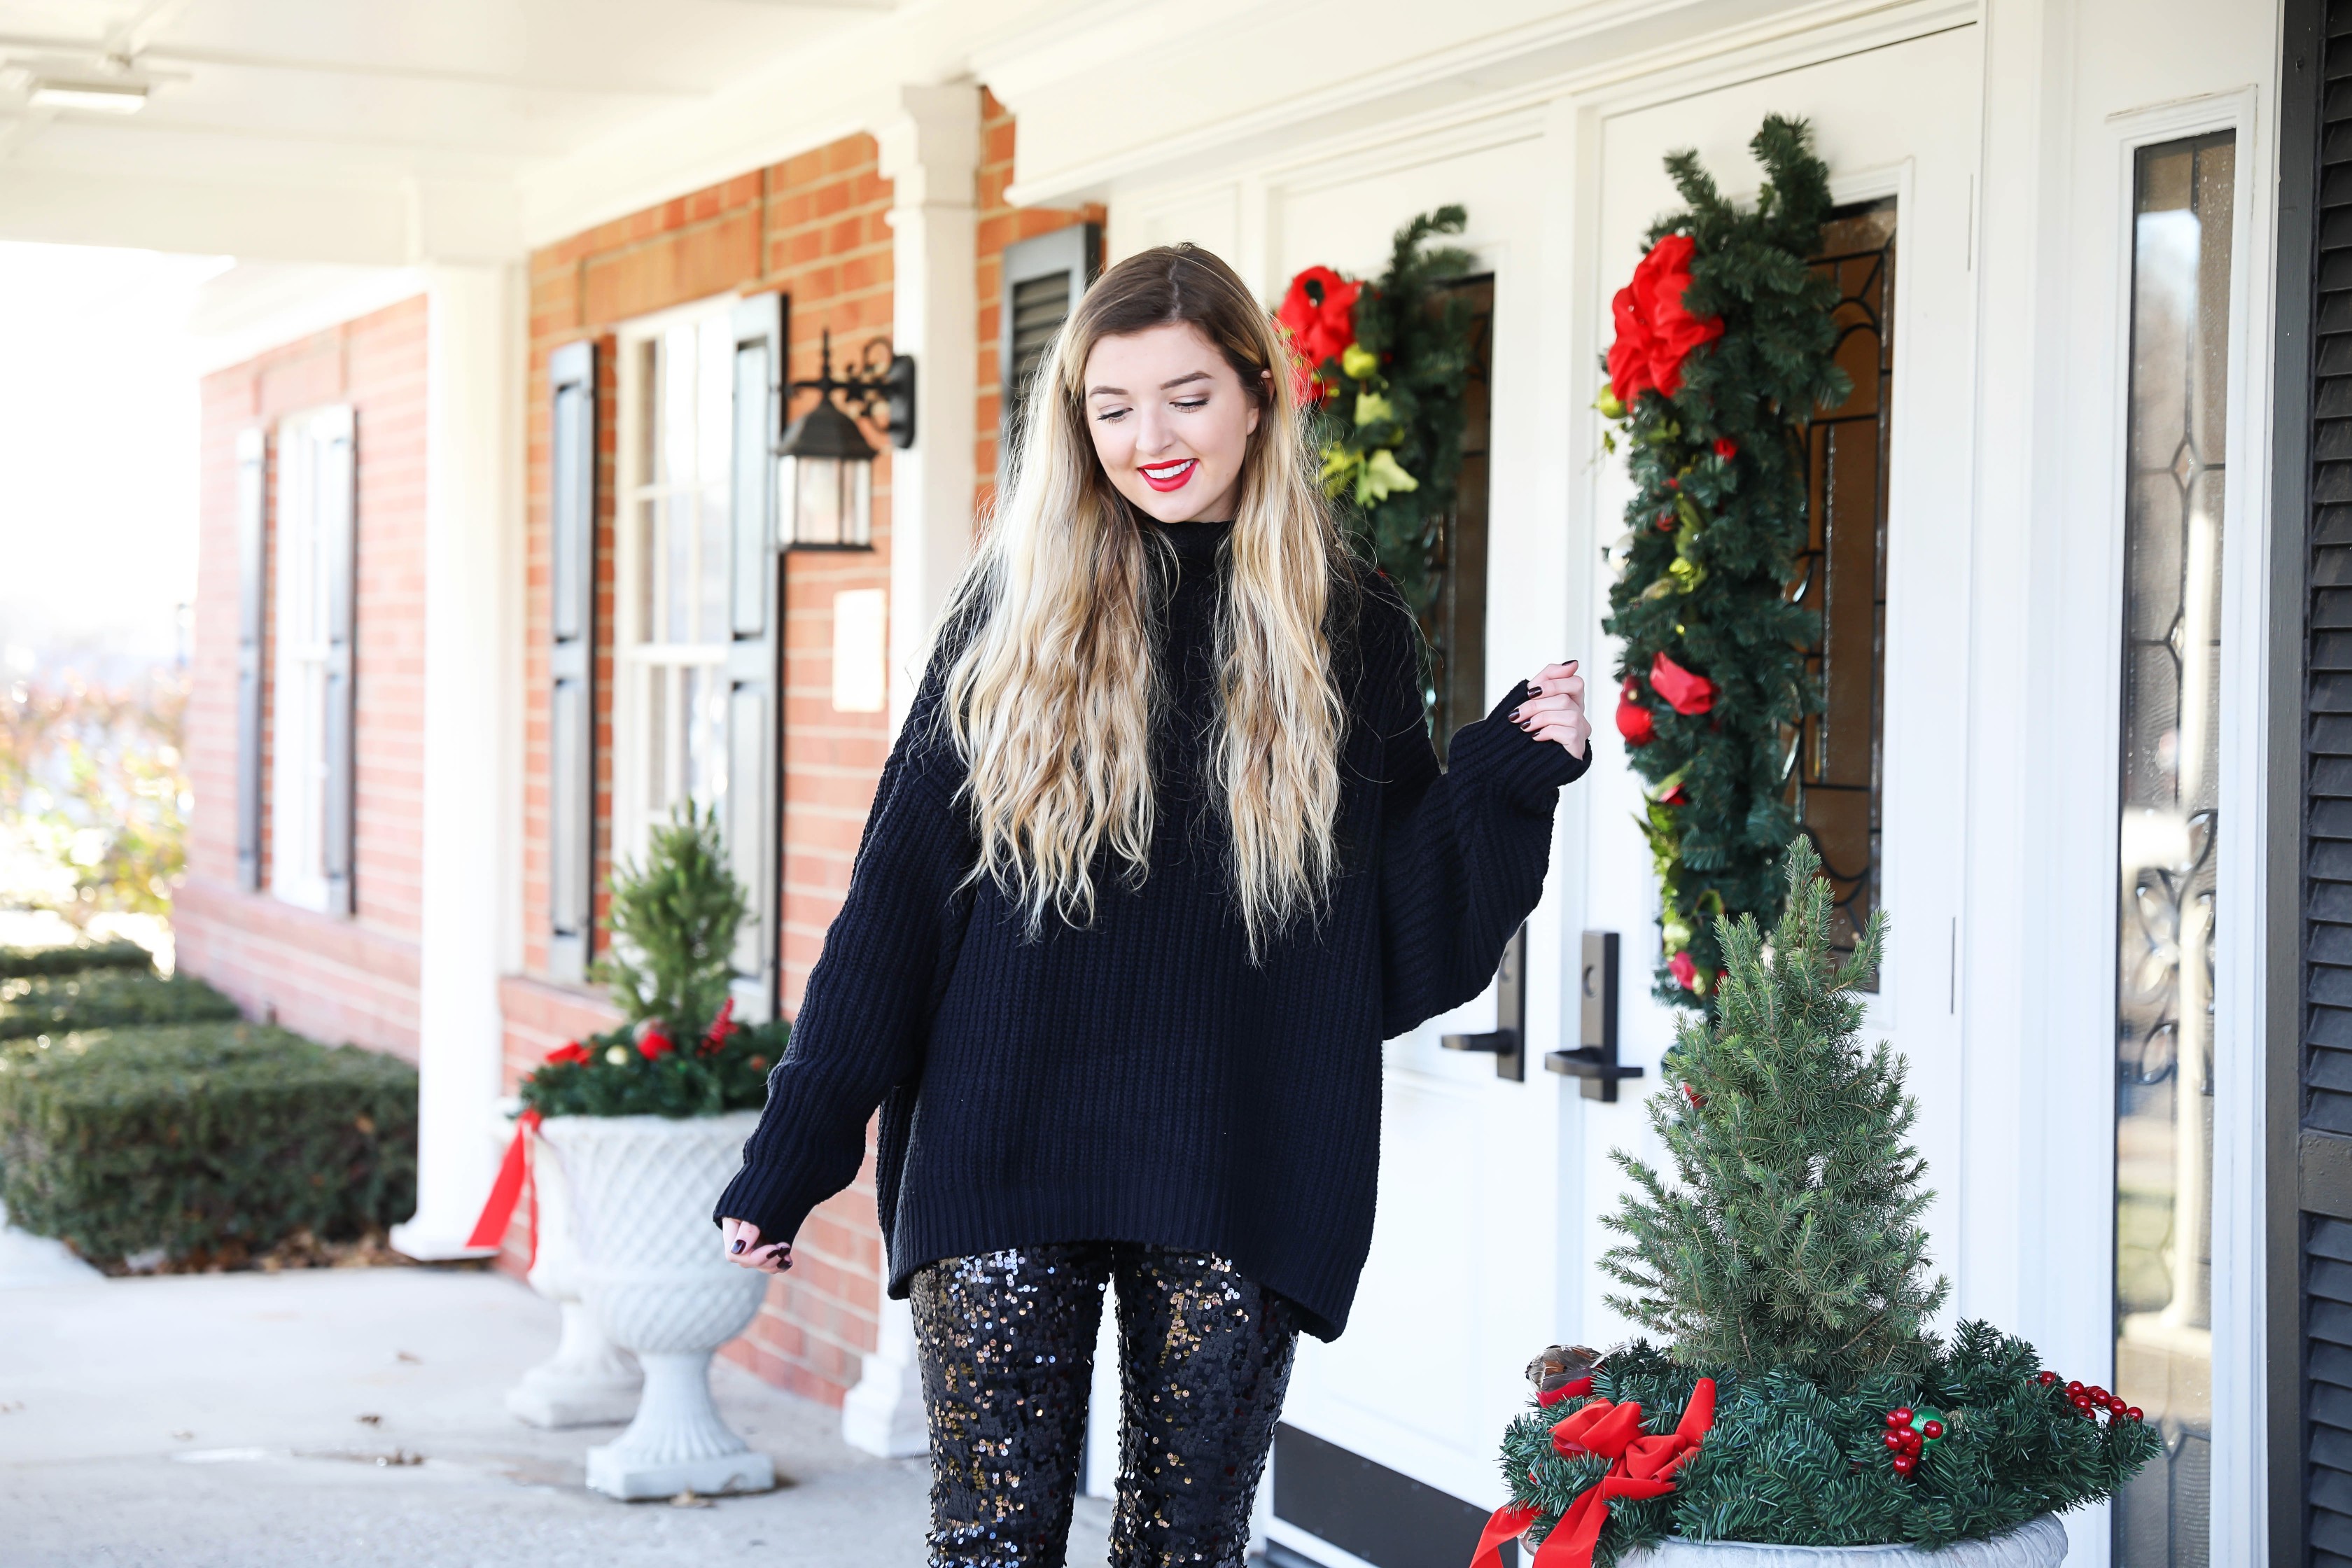 New Years eve outfit idea! Sequin pants and a black sweater, perfect for NYE! How to style sequin pants for nye! Details on fashio blog daily dose of charm by lauren lindmark